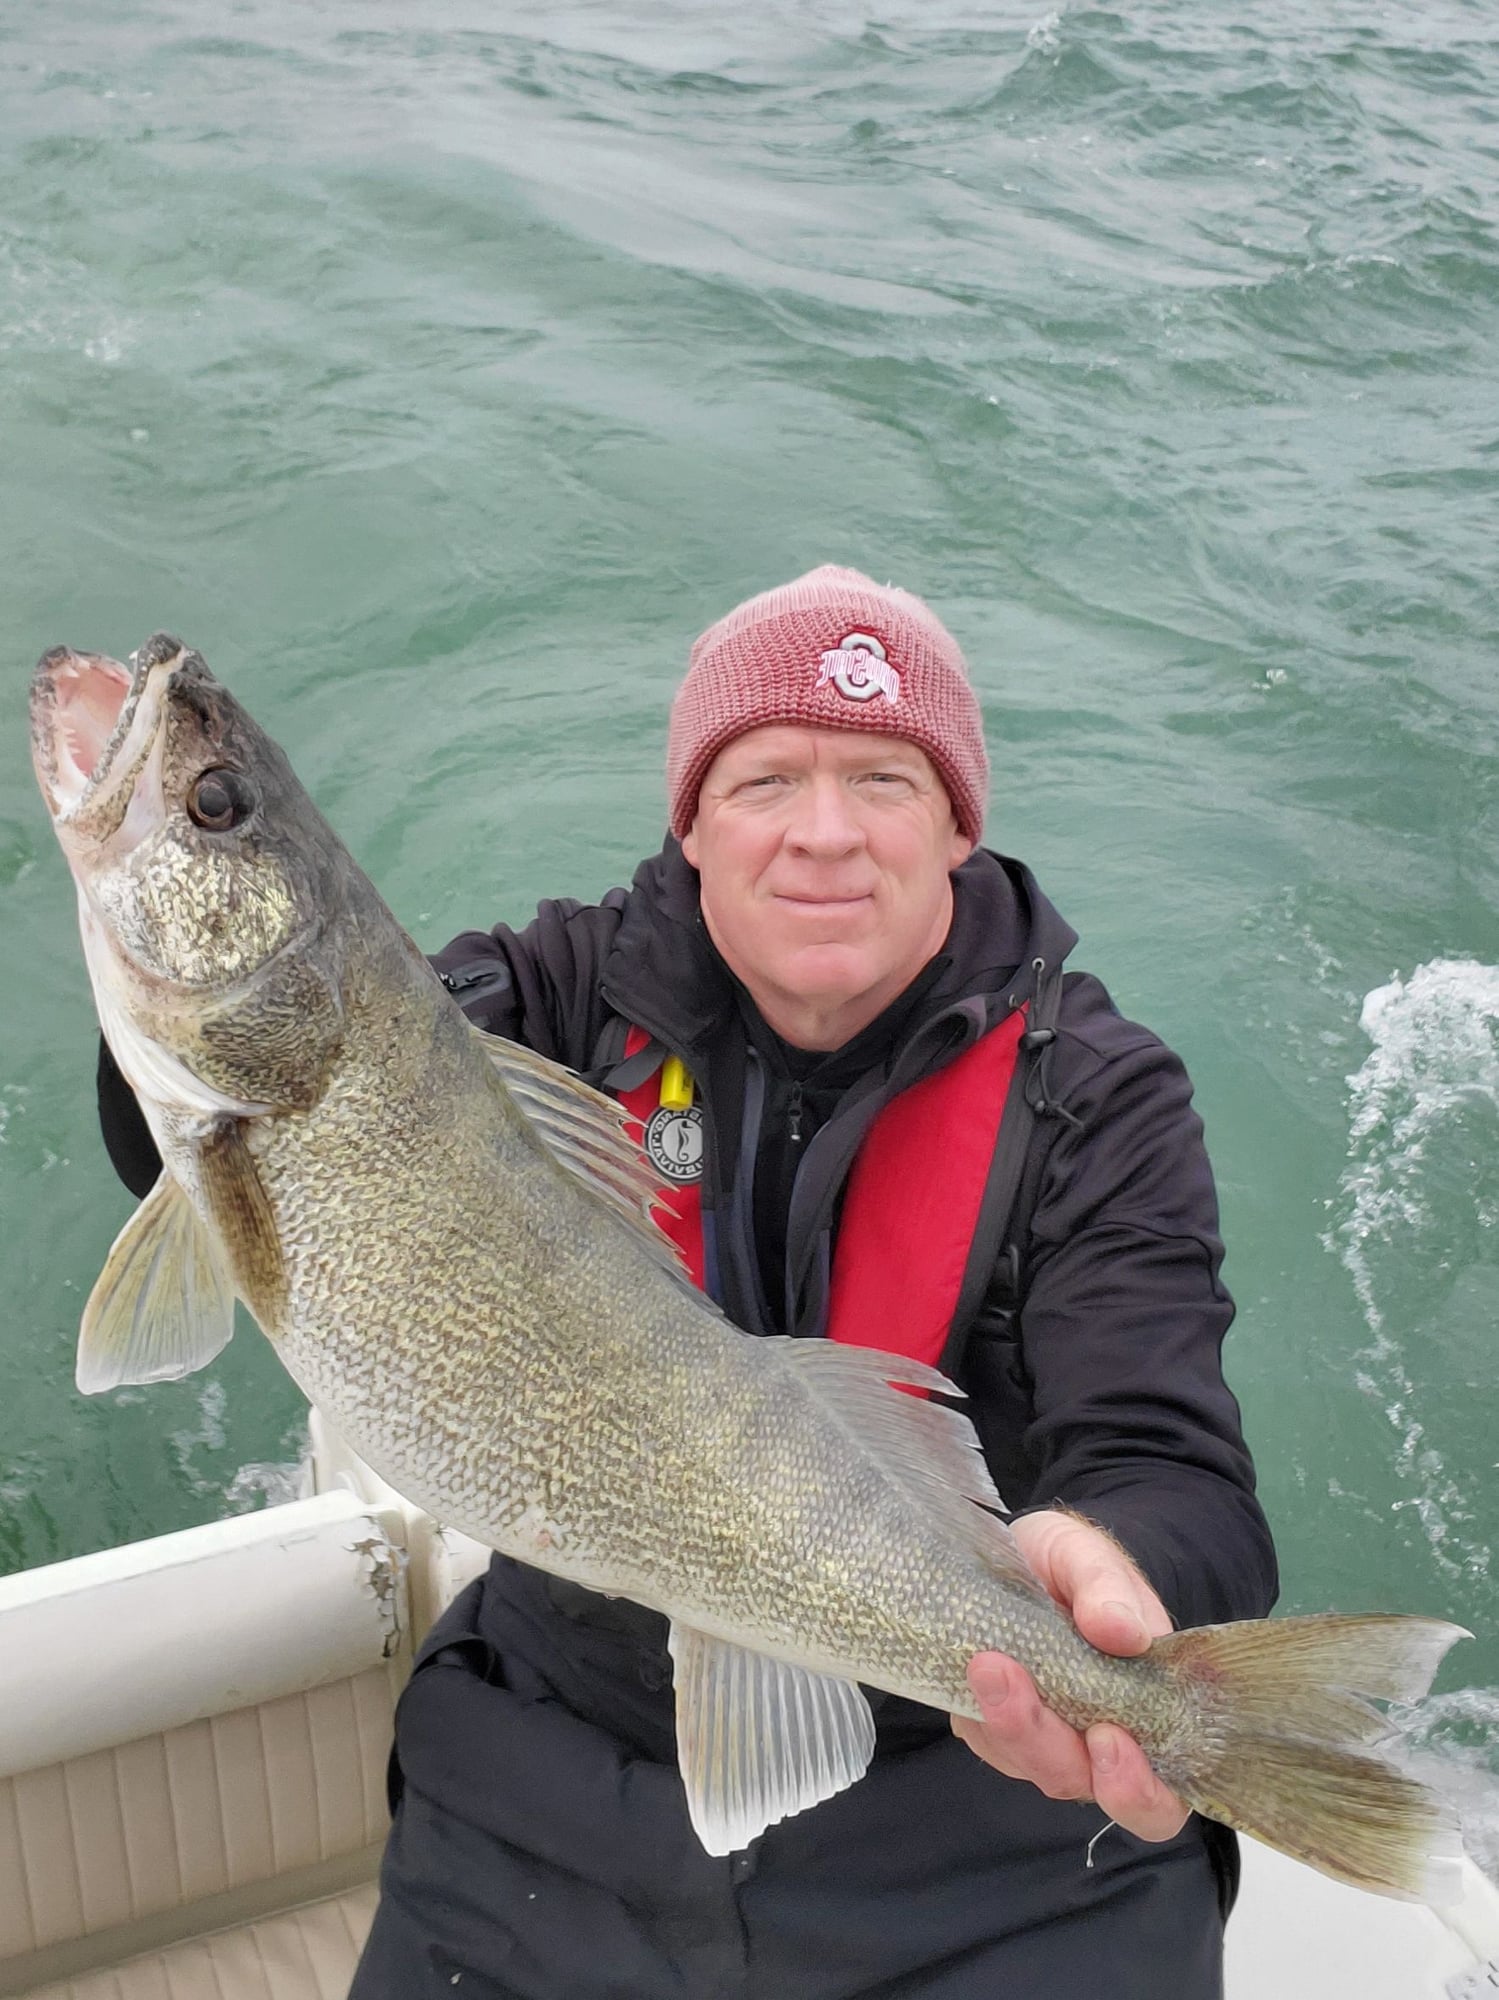 Western Lake Erie fishing report. - Page 104 - The Hull Truth